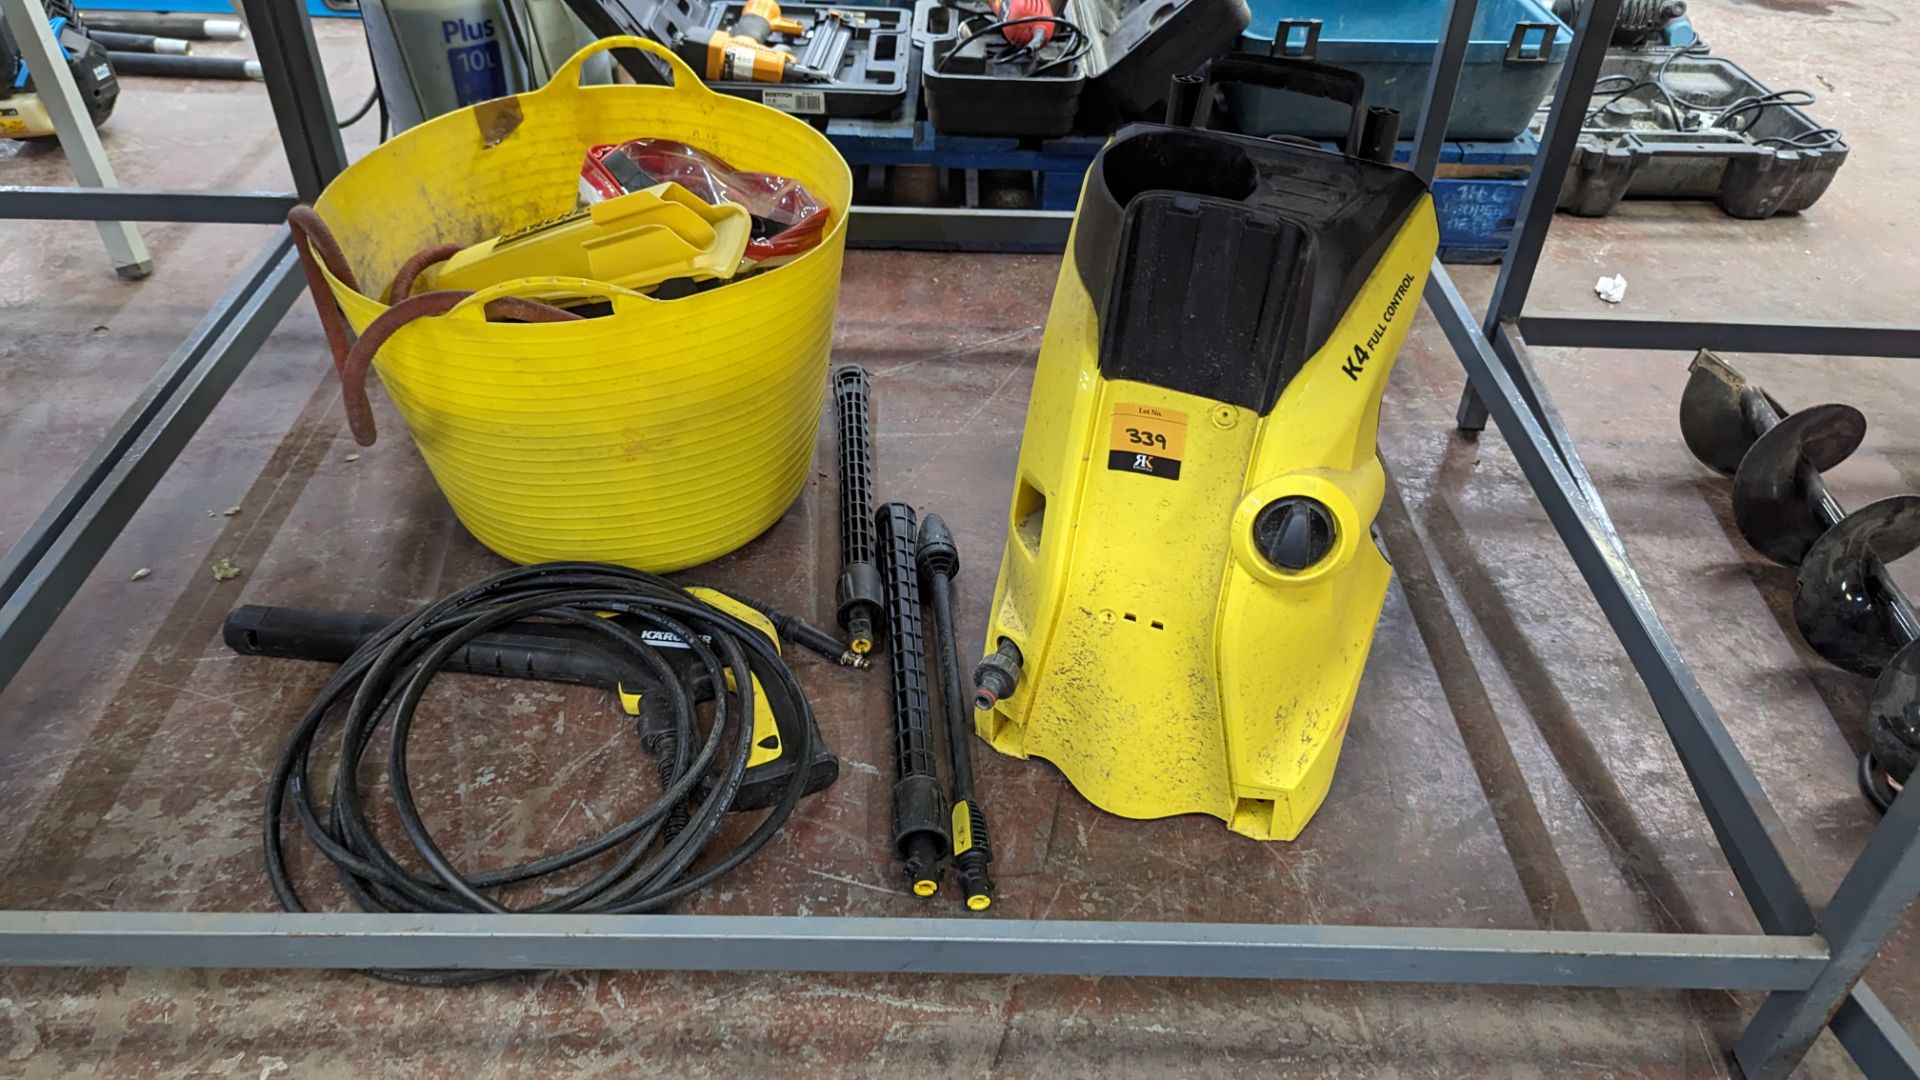 Karcher pressure washer including attachments plus bucket & contents - the total contents of the bay - Image 2 of 7